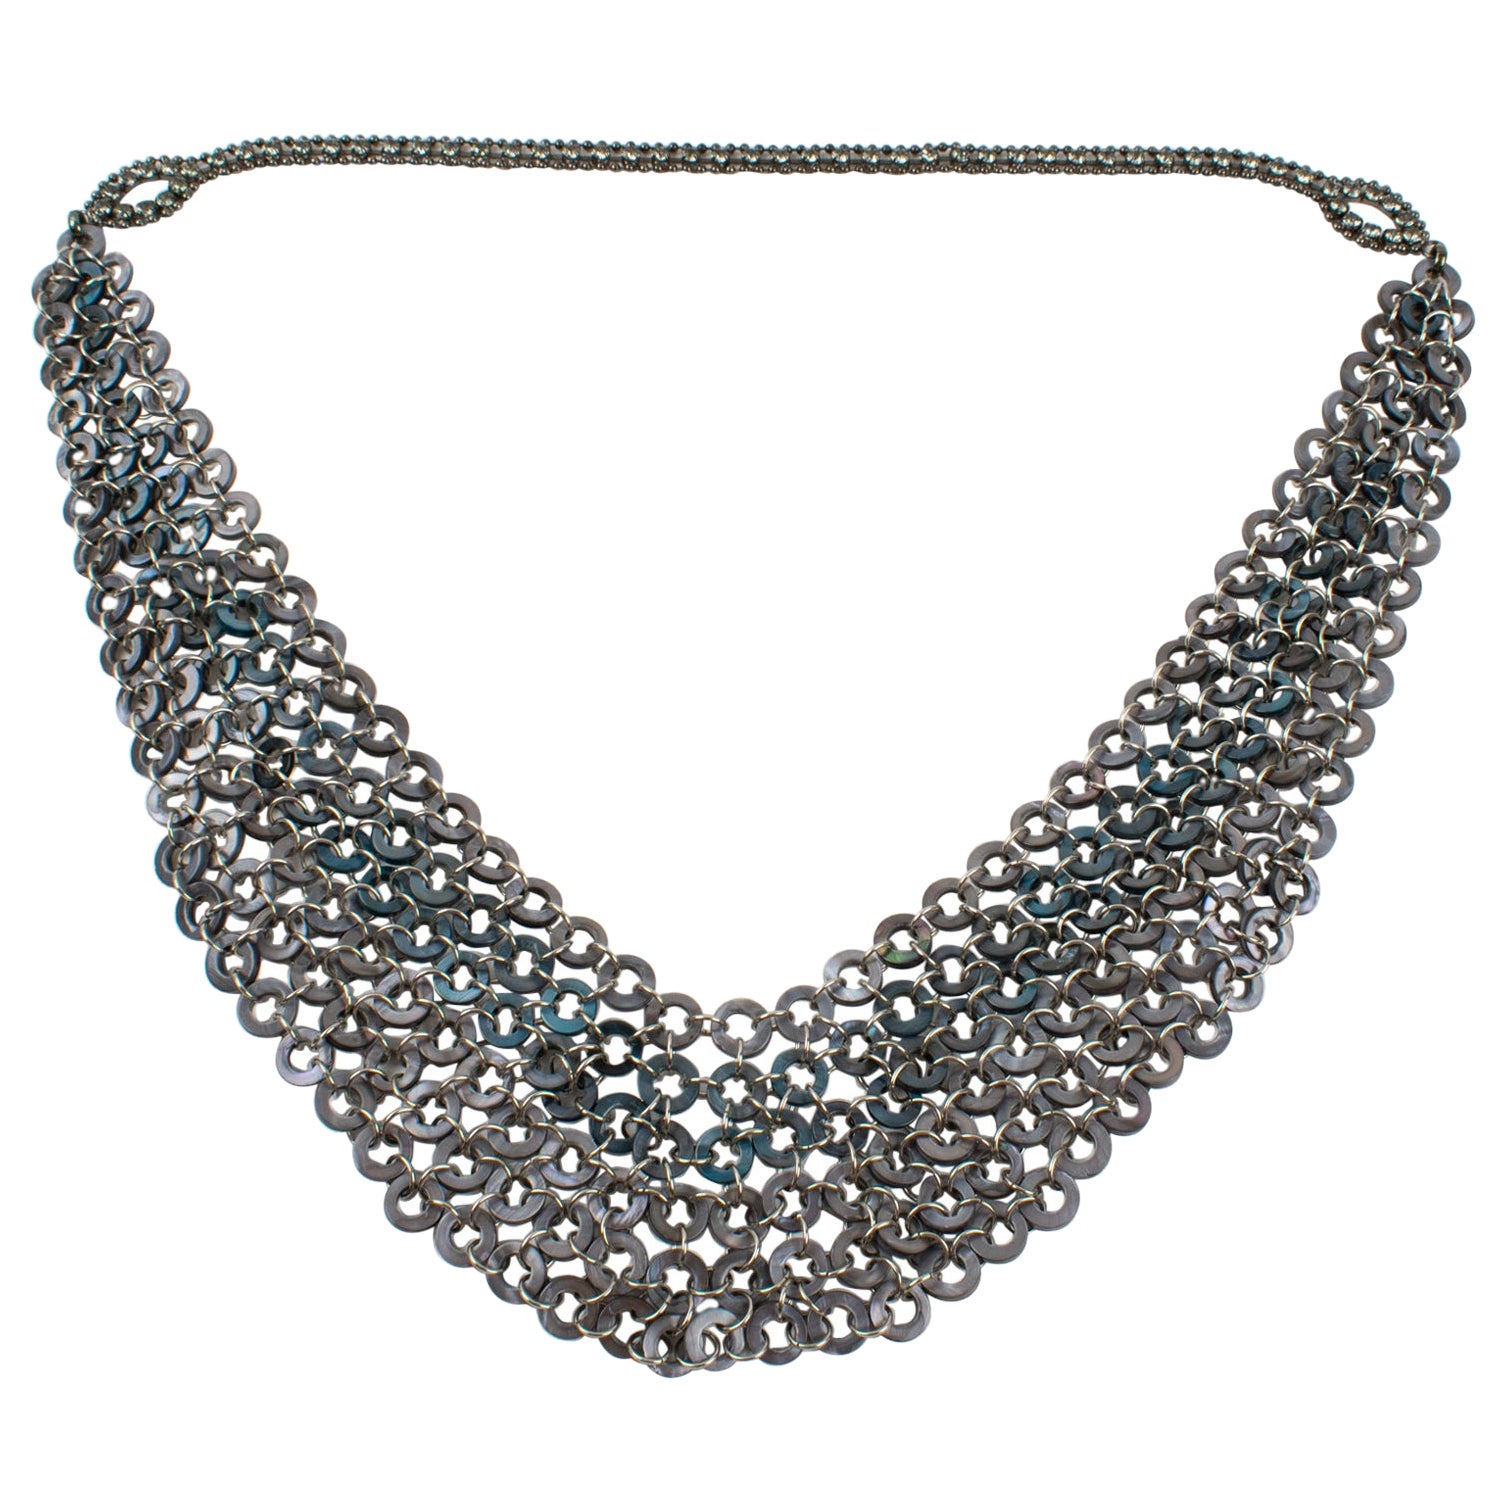 Paco Rabanne Style Futuristic Drapery Space Age Link Necklace For Sale